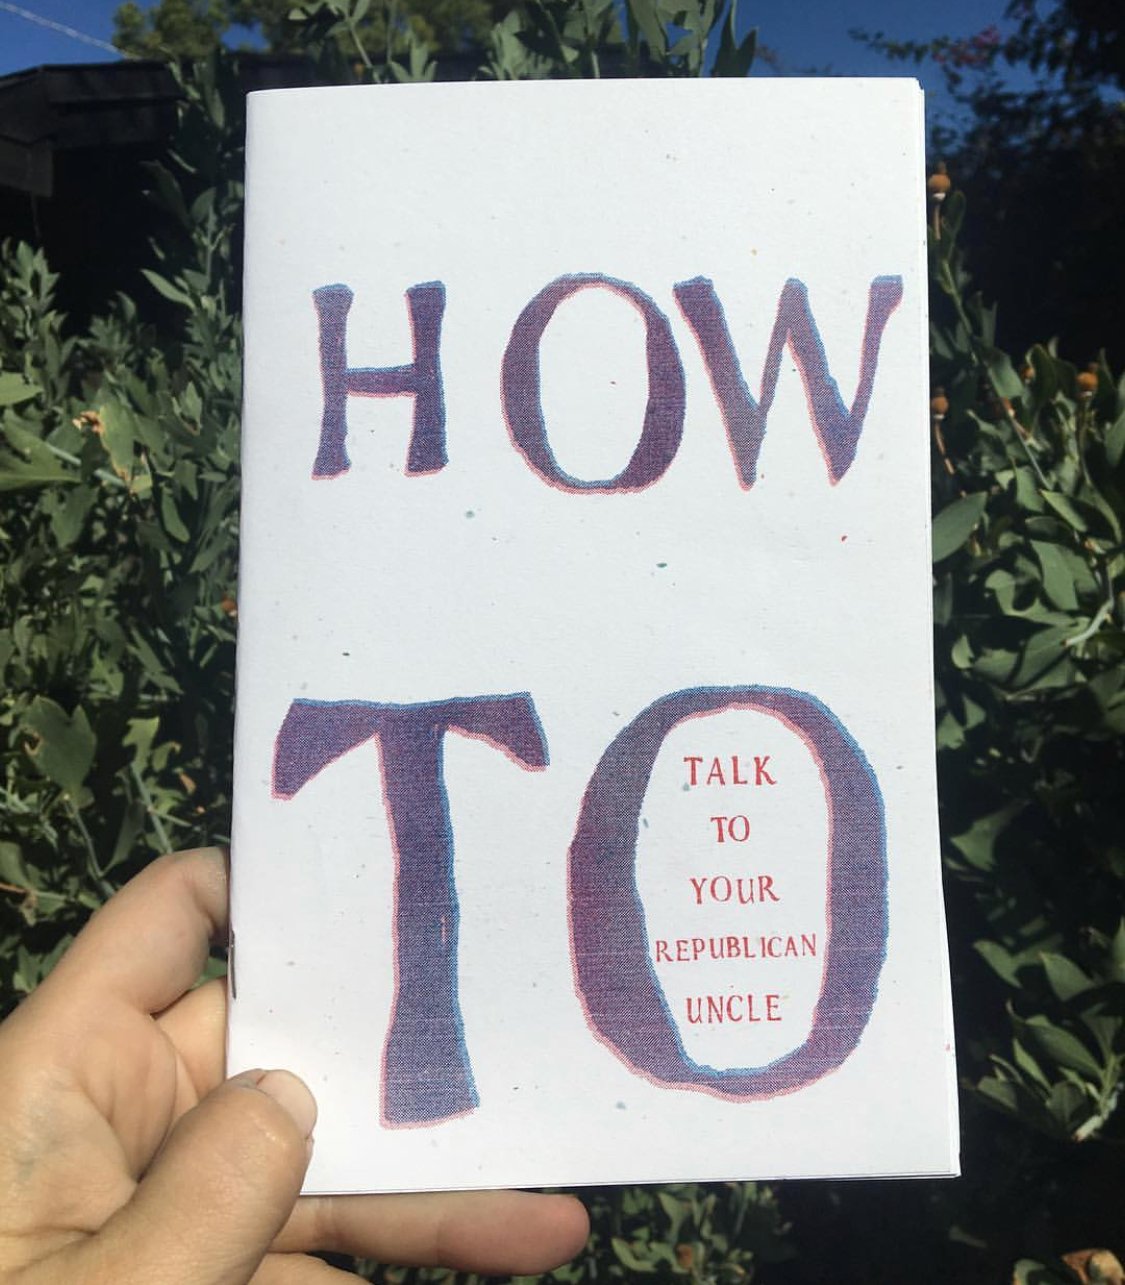 photo of hand holding a color printed zine: "How" and "To" in large letters, "Talk to Your Republican Uncle" in smaller letters inside the "o" in "to"